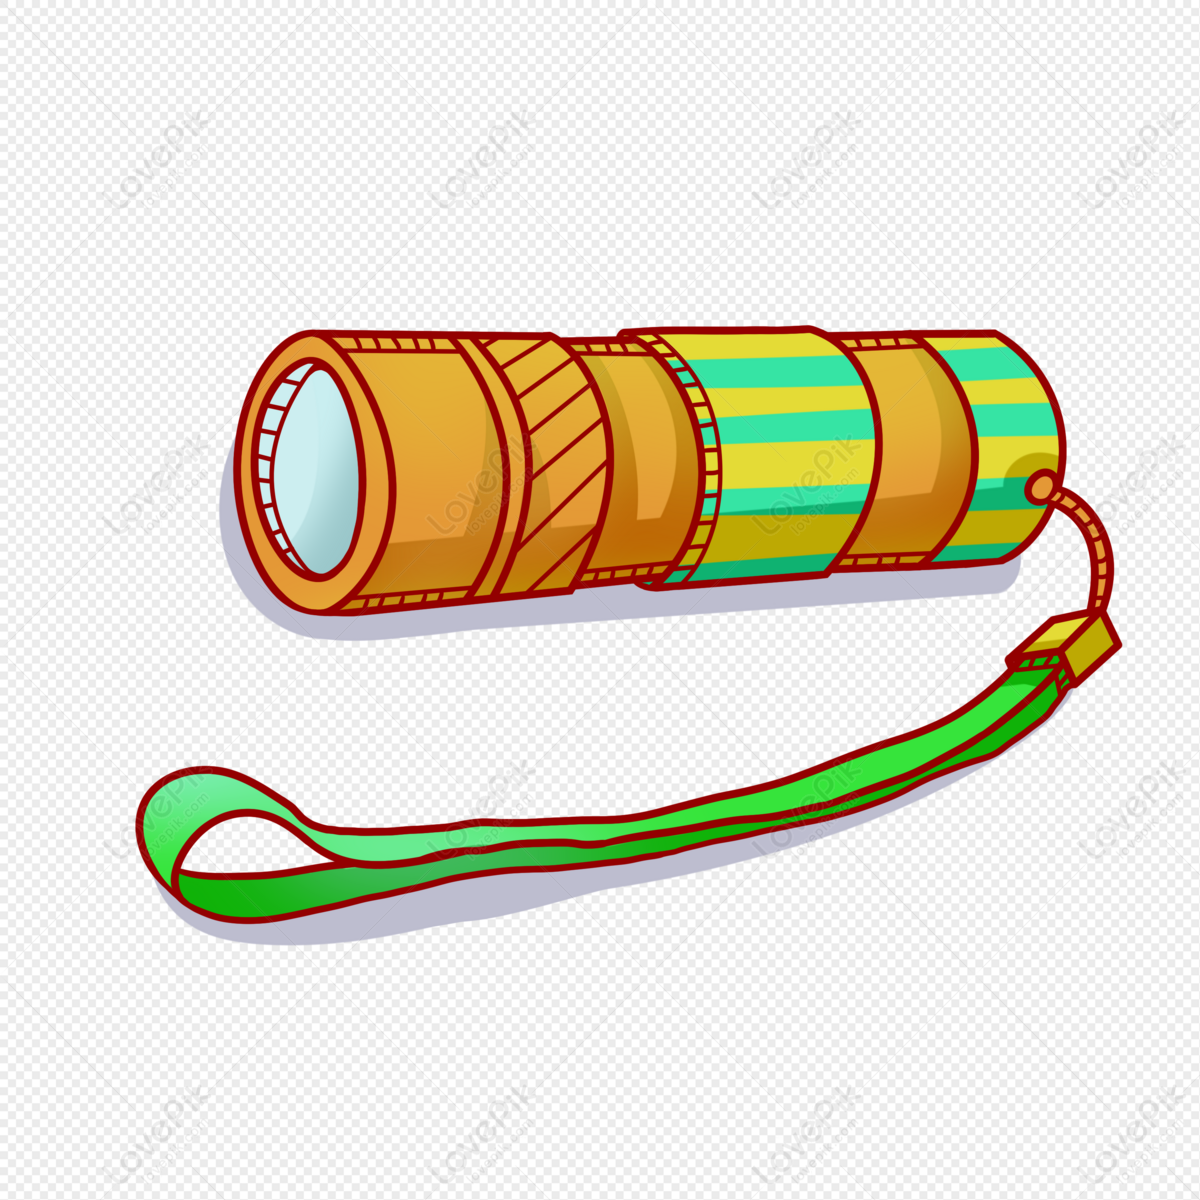 rechargeable-flashlight-images-hd-pictures-for-free-vectors-psd